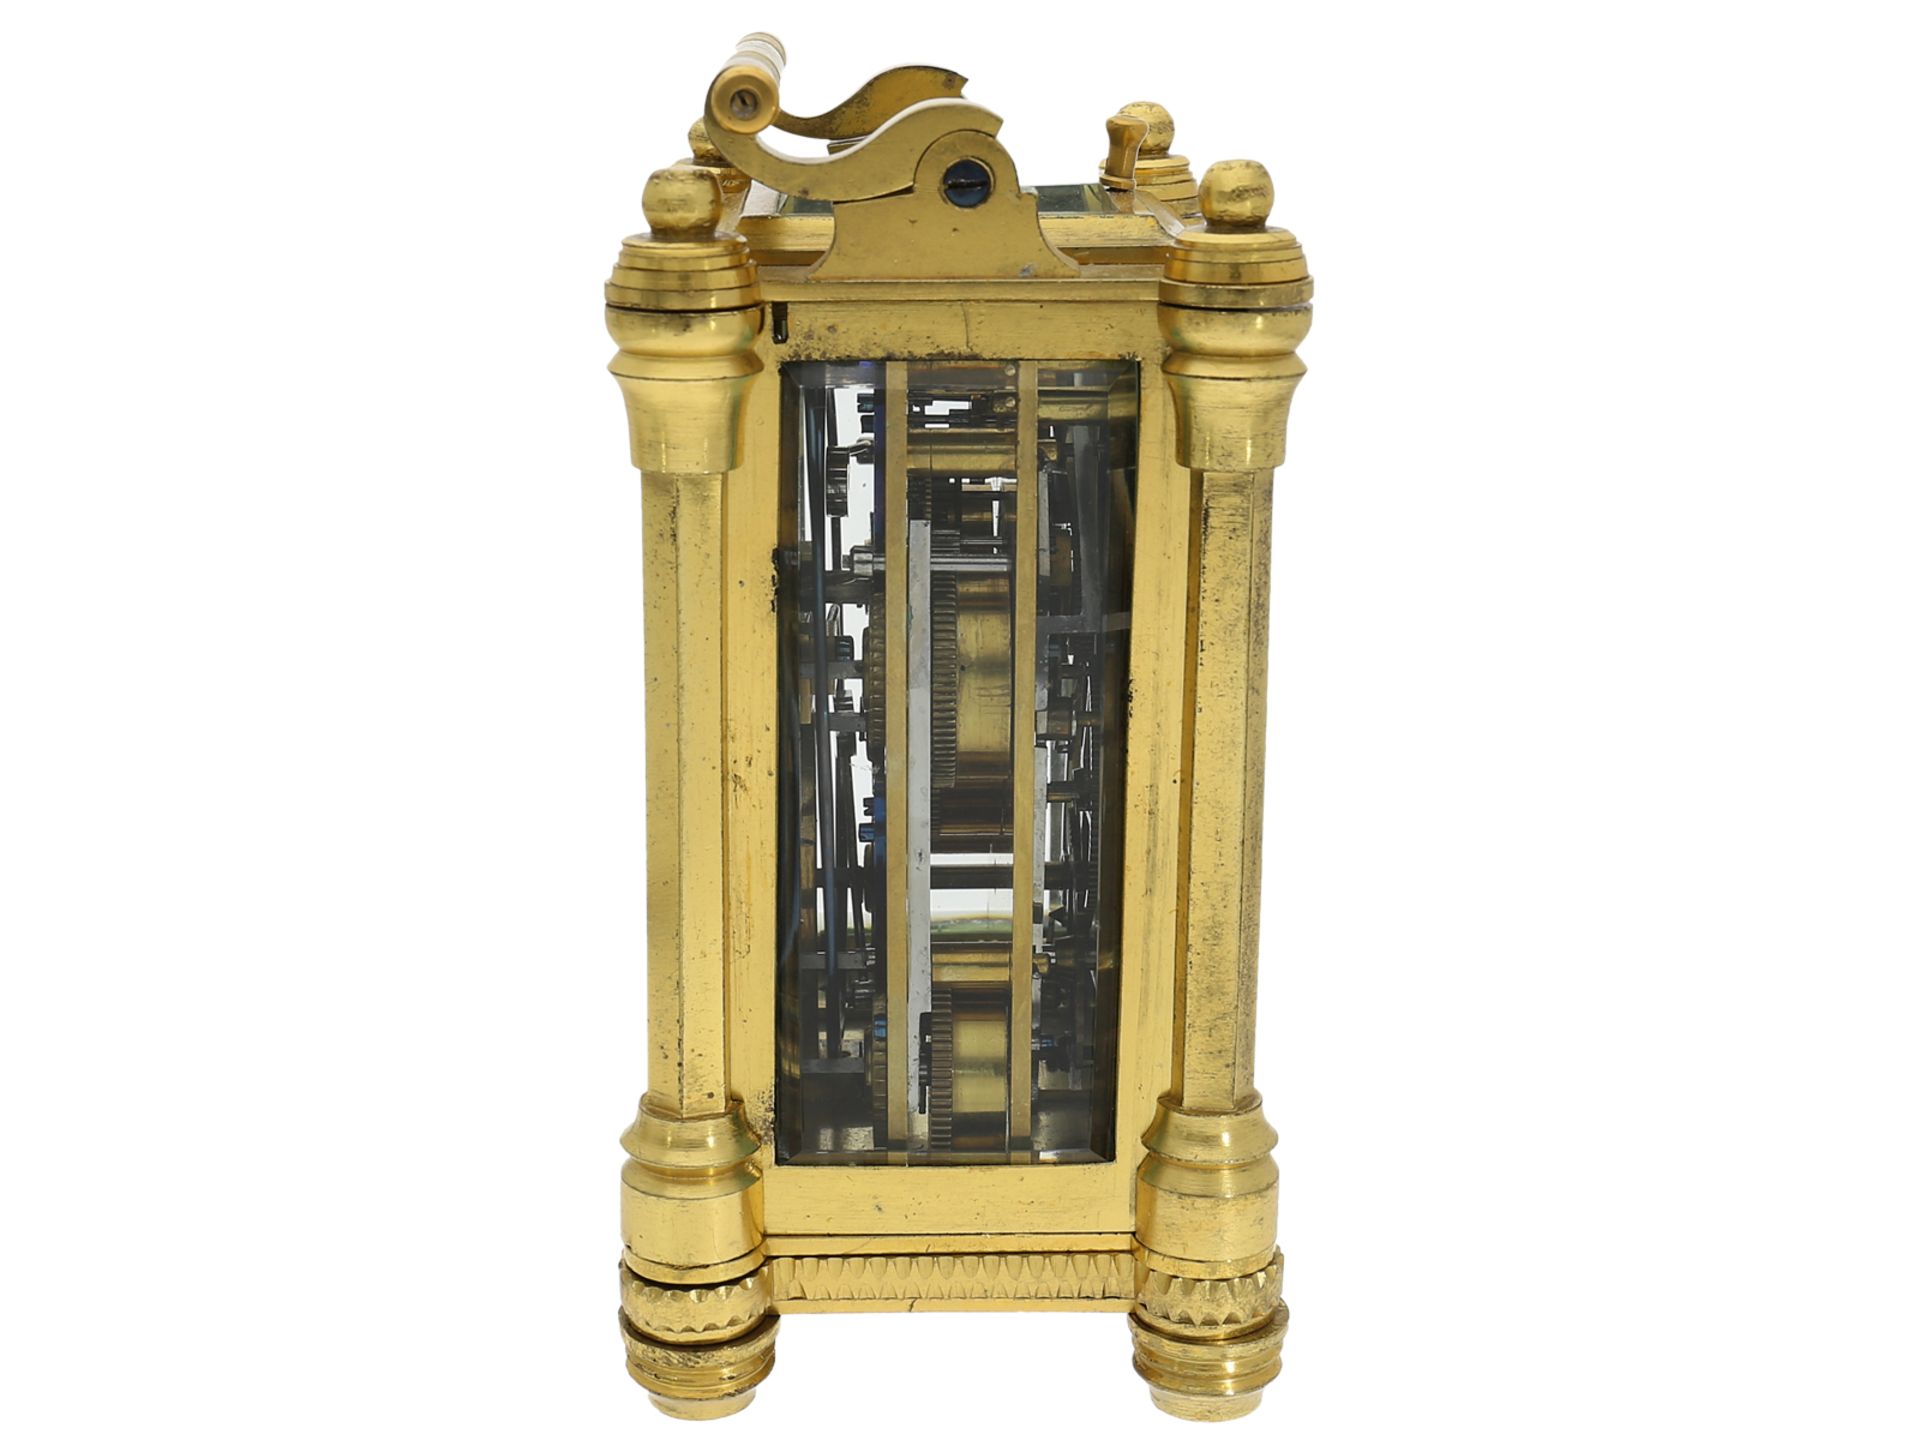 Travel clock: highly complicated, technically interesting travel clock with 4 complications, 19th ce - Image 5 of 6